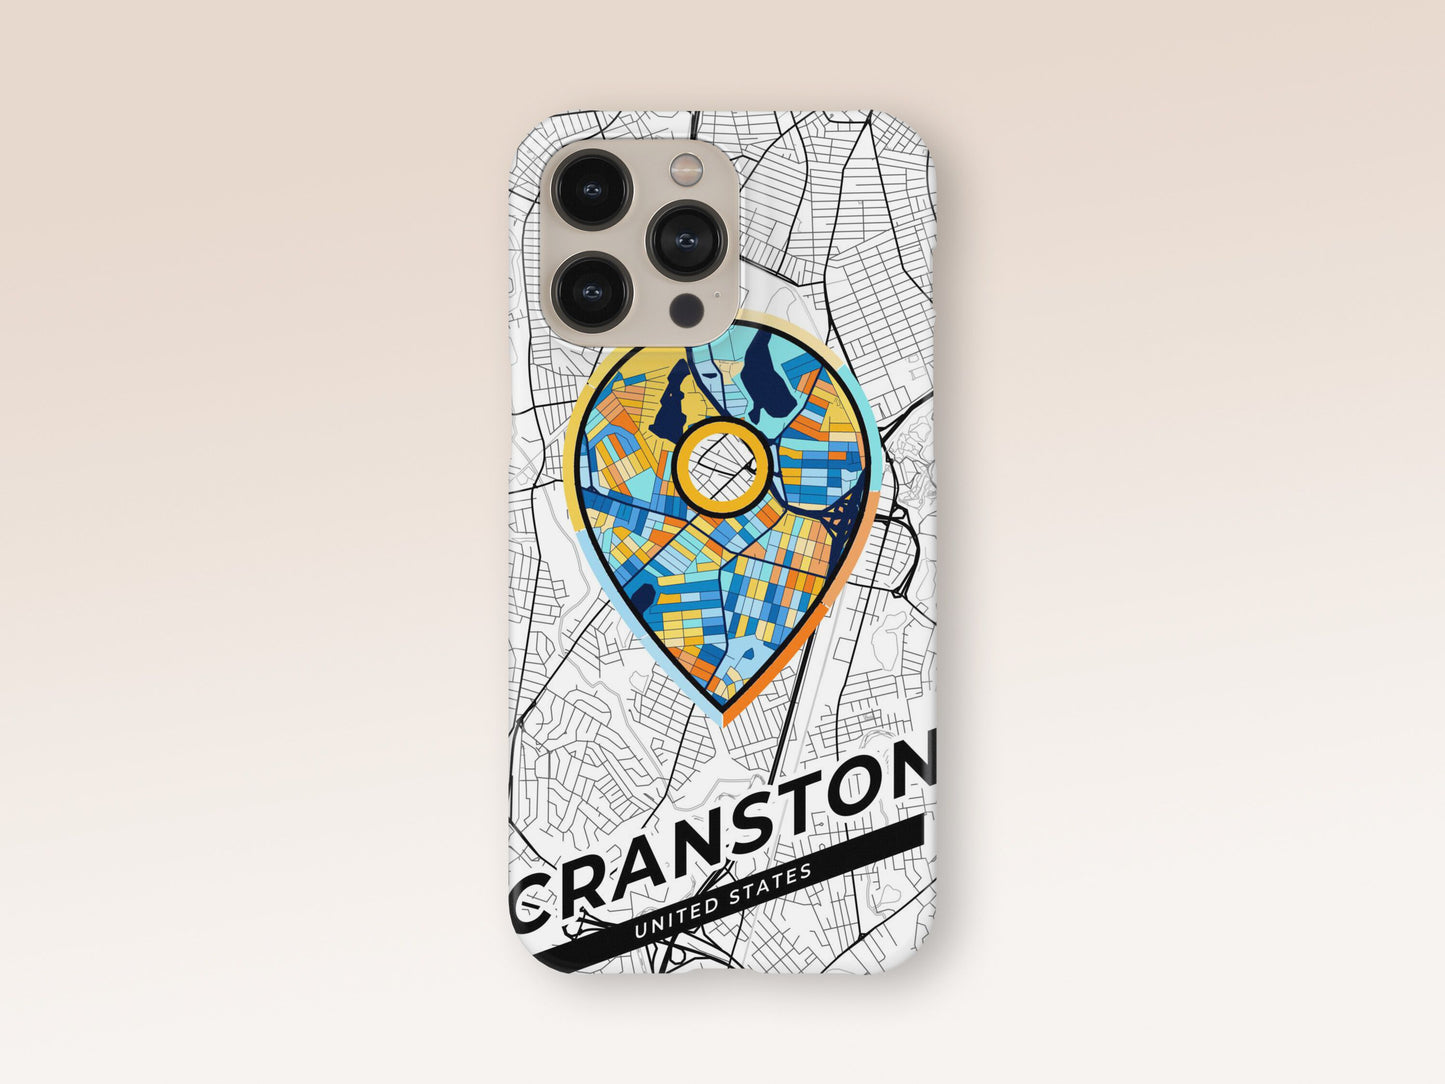 Cranston Rhode Island slim phone case with colorful icon. Birthday, wedding or housewarming gift. Couple match cases. 1